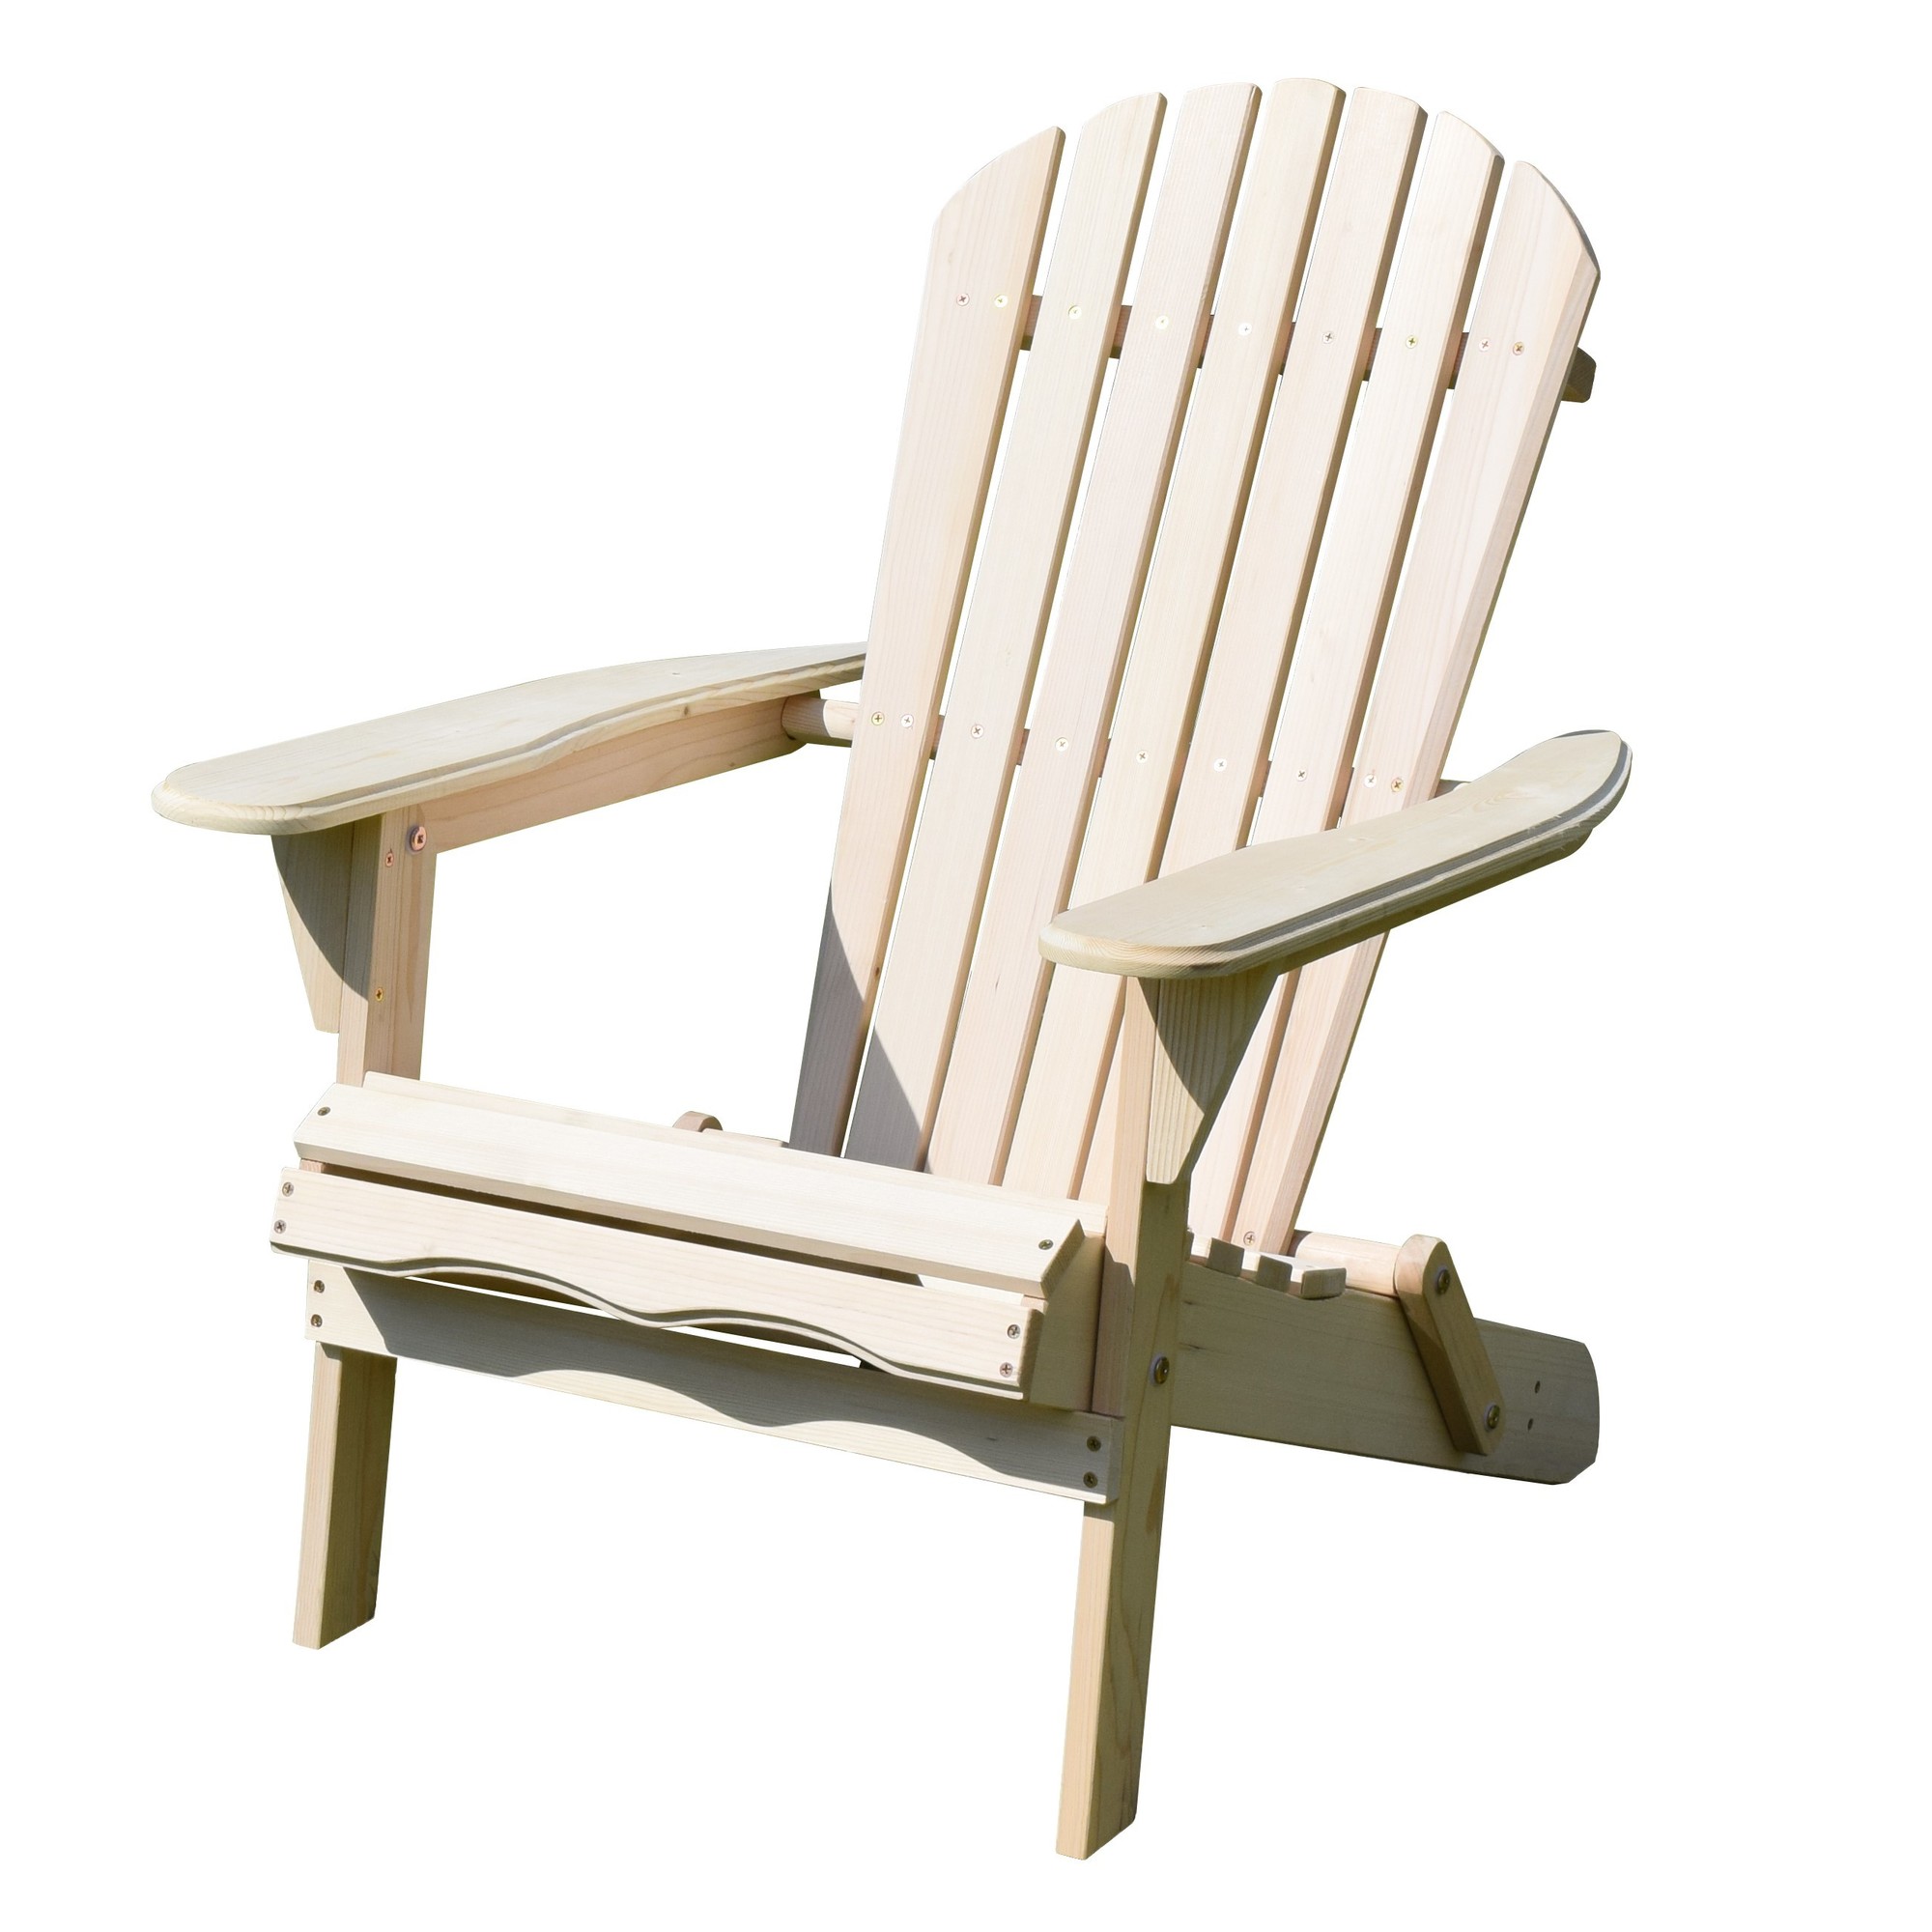 Merry Products, Foldable Adirondack Chair Kit, Primary Color Natural, Included (qty.) 1, Model MPG-ACE010KIT